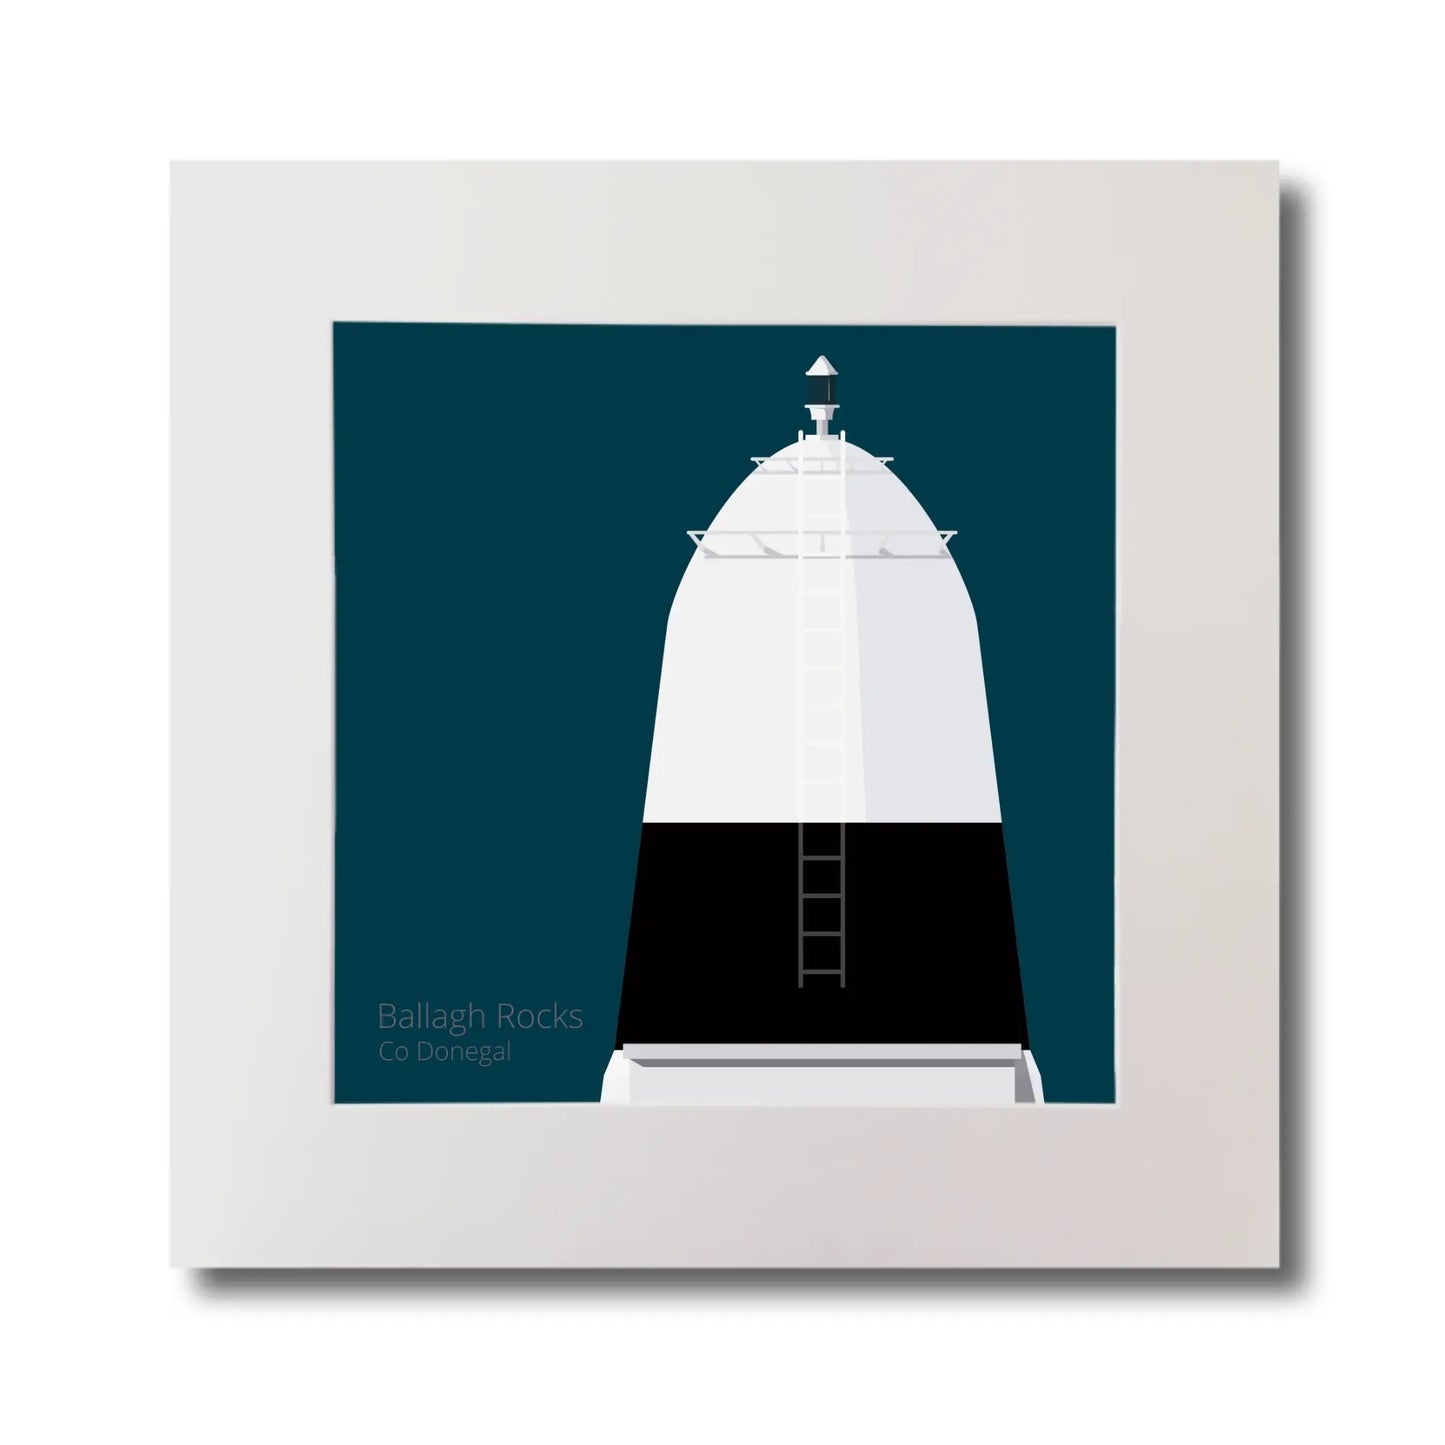 Illustration Ballagh Rocks lighthouse on a midnight blue background, mounted and measuring 30x30cm.